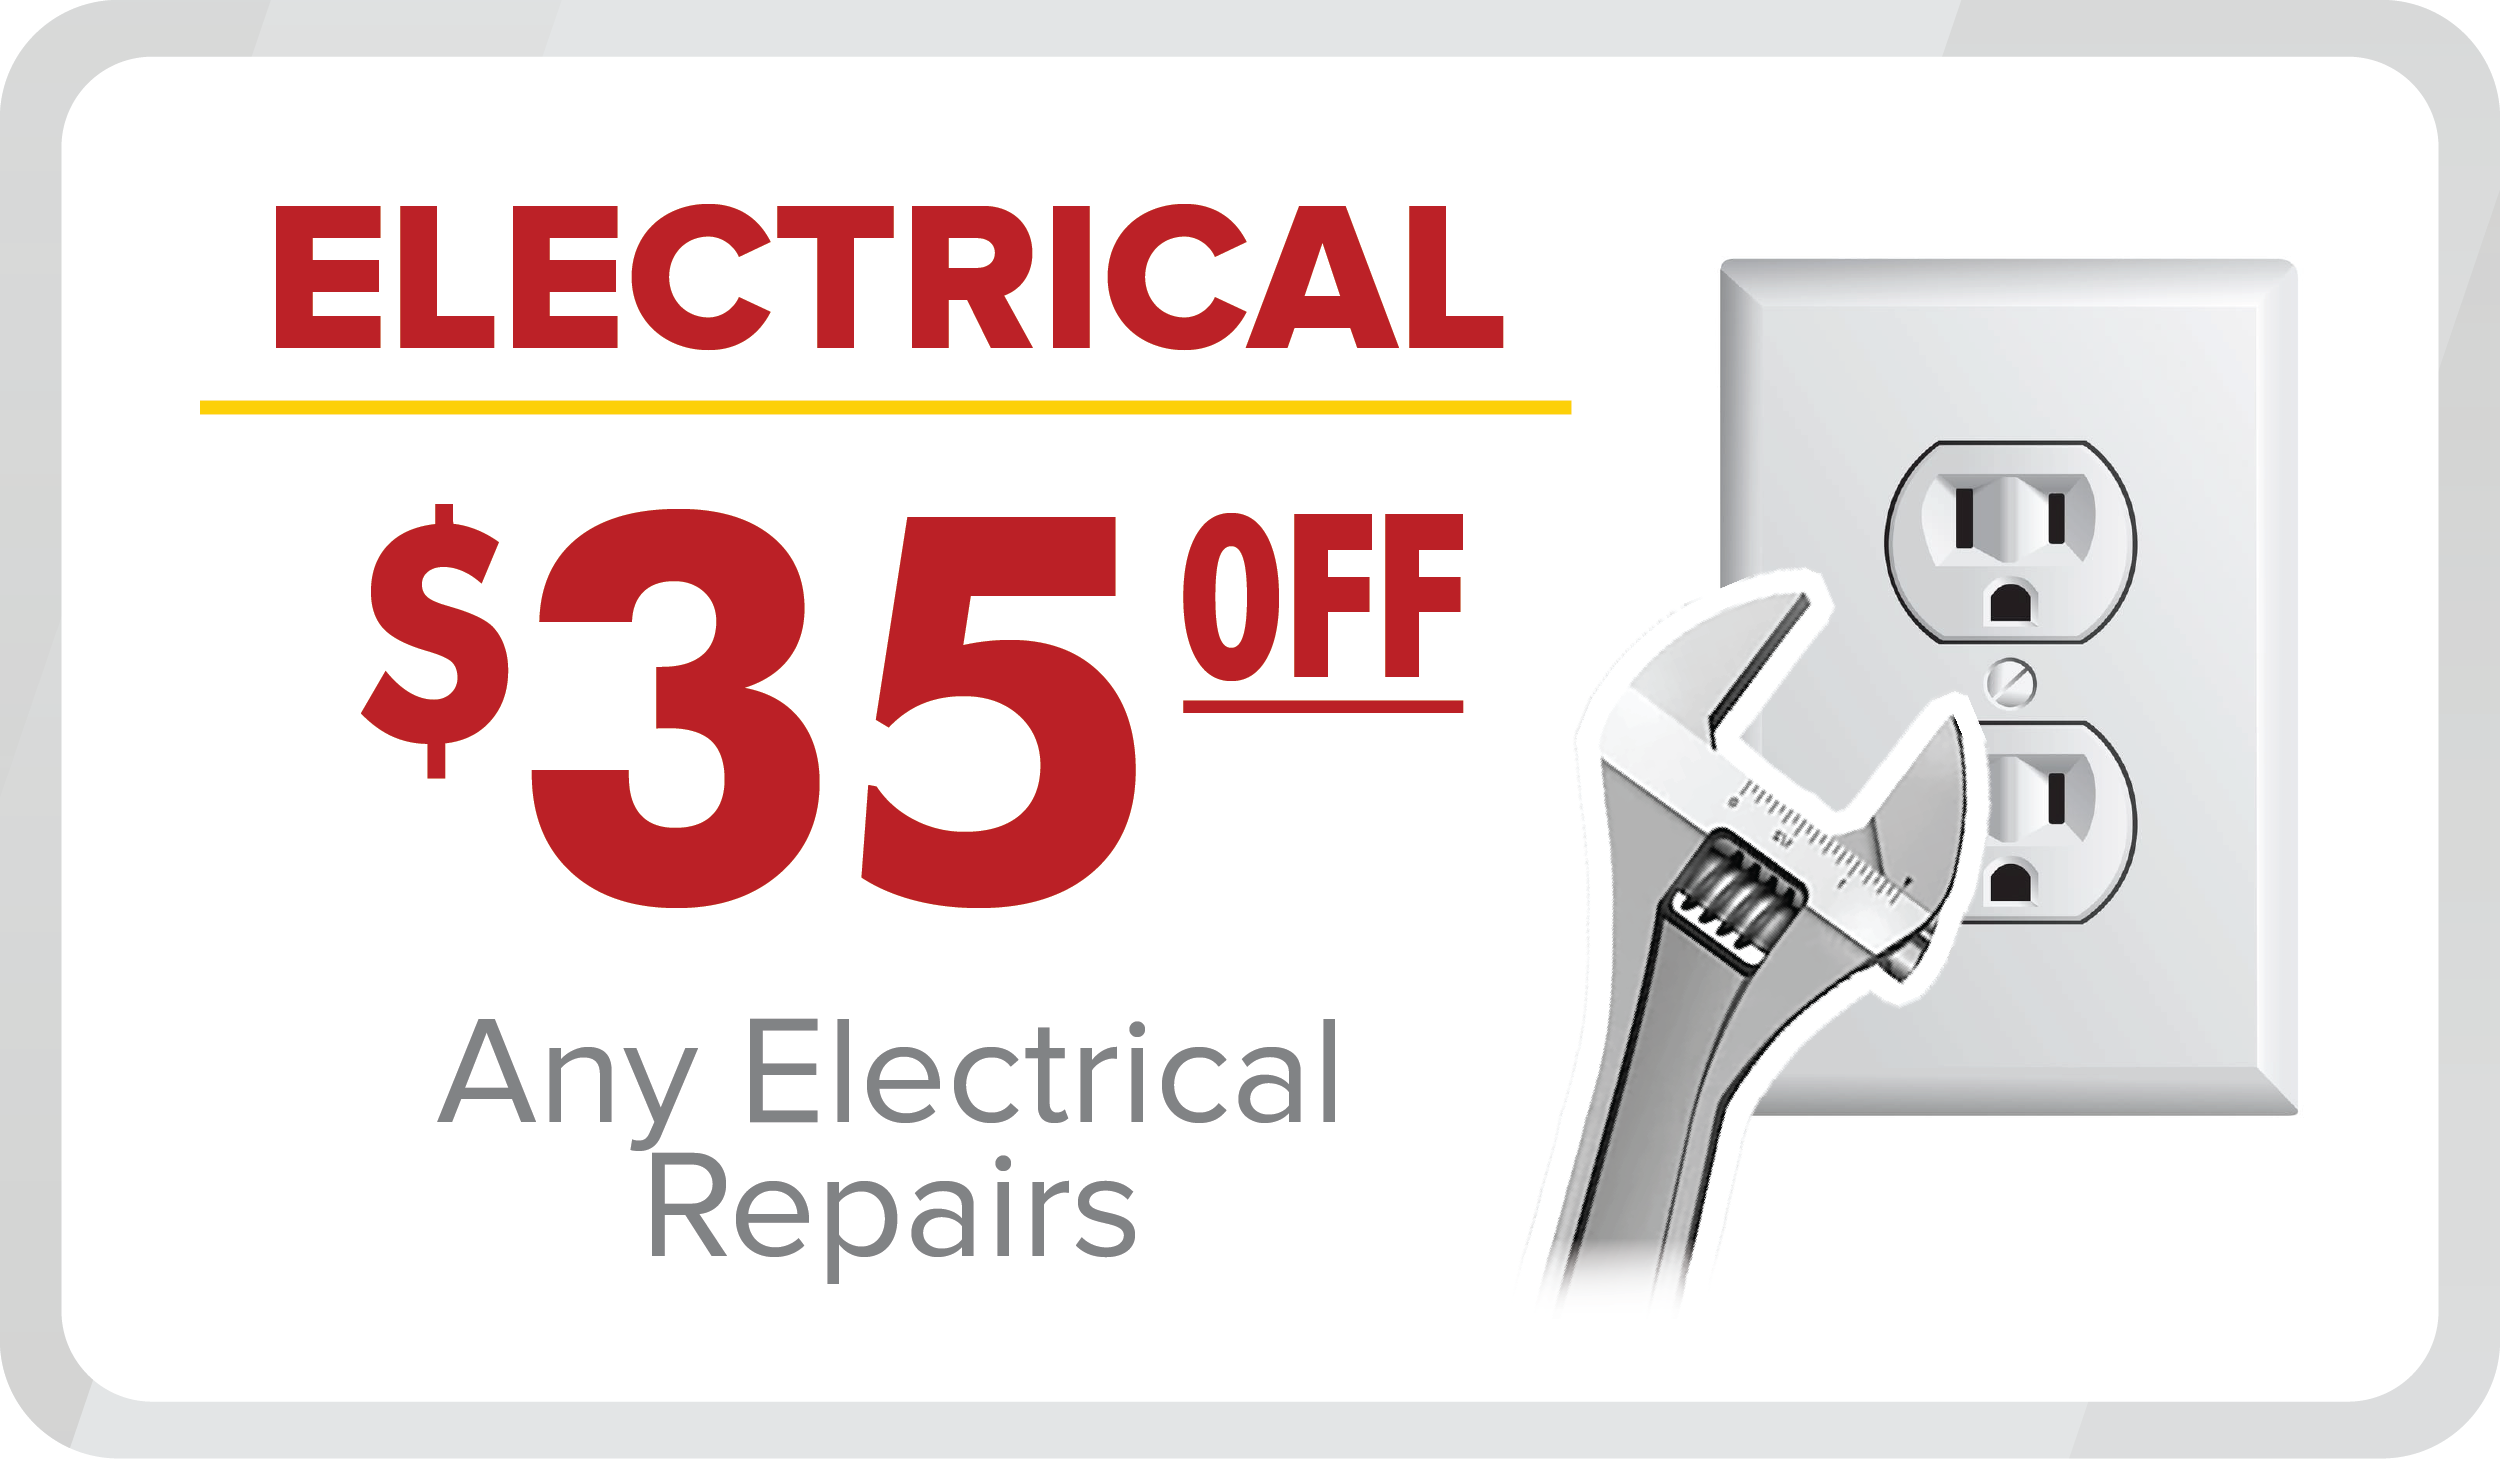 $35 OFF Any Electrical Repairs